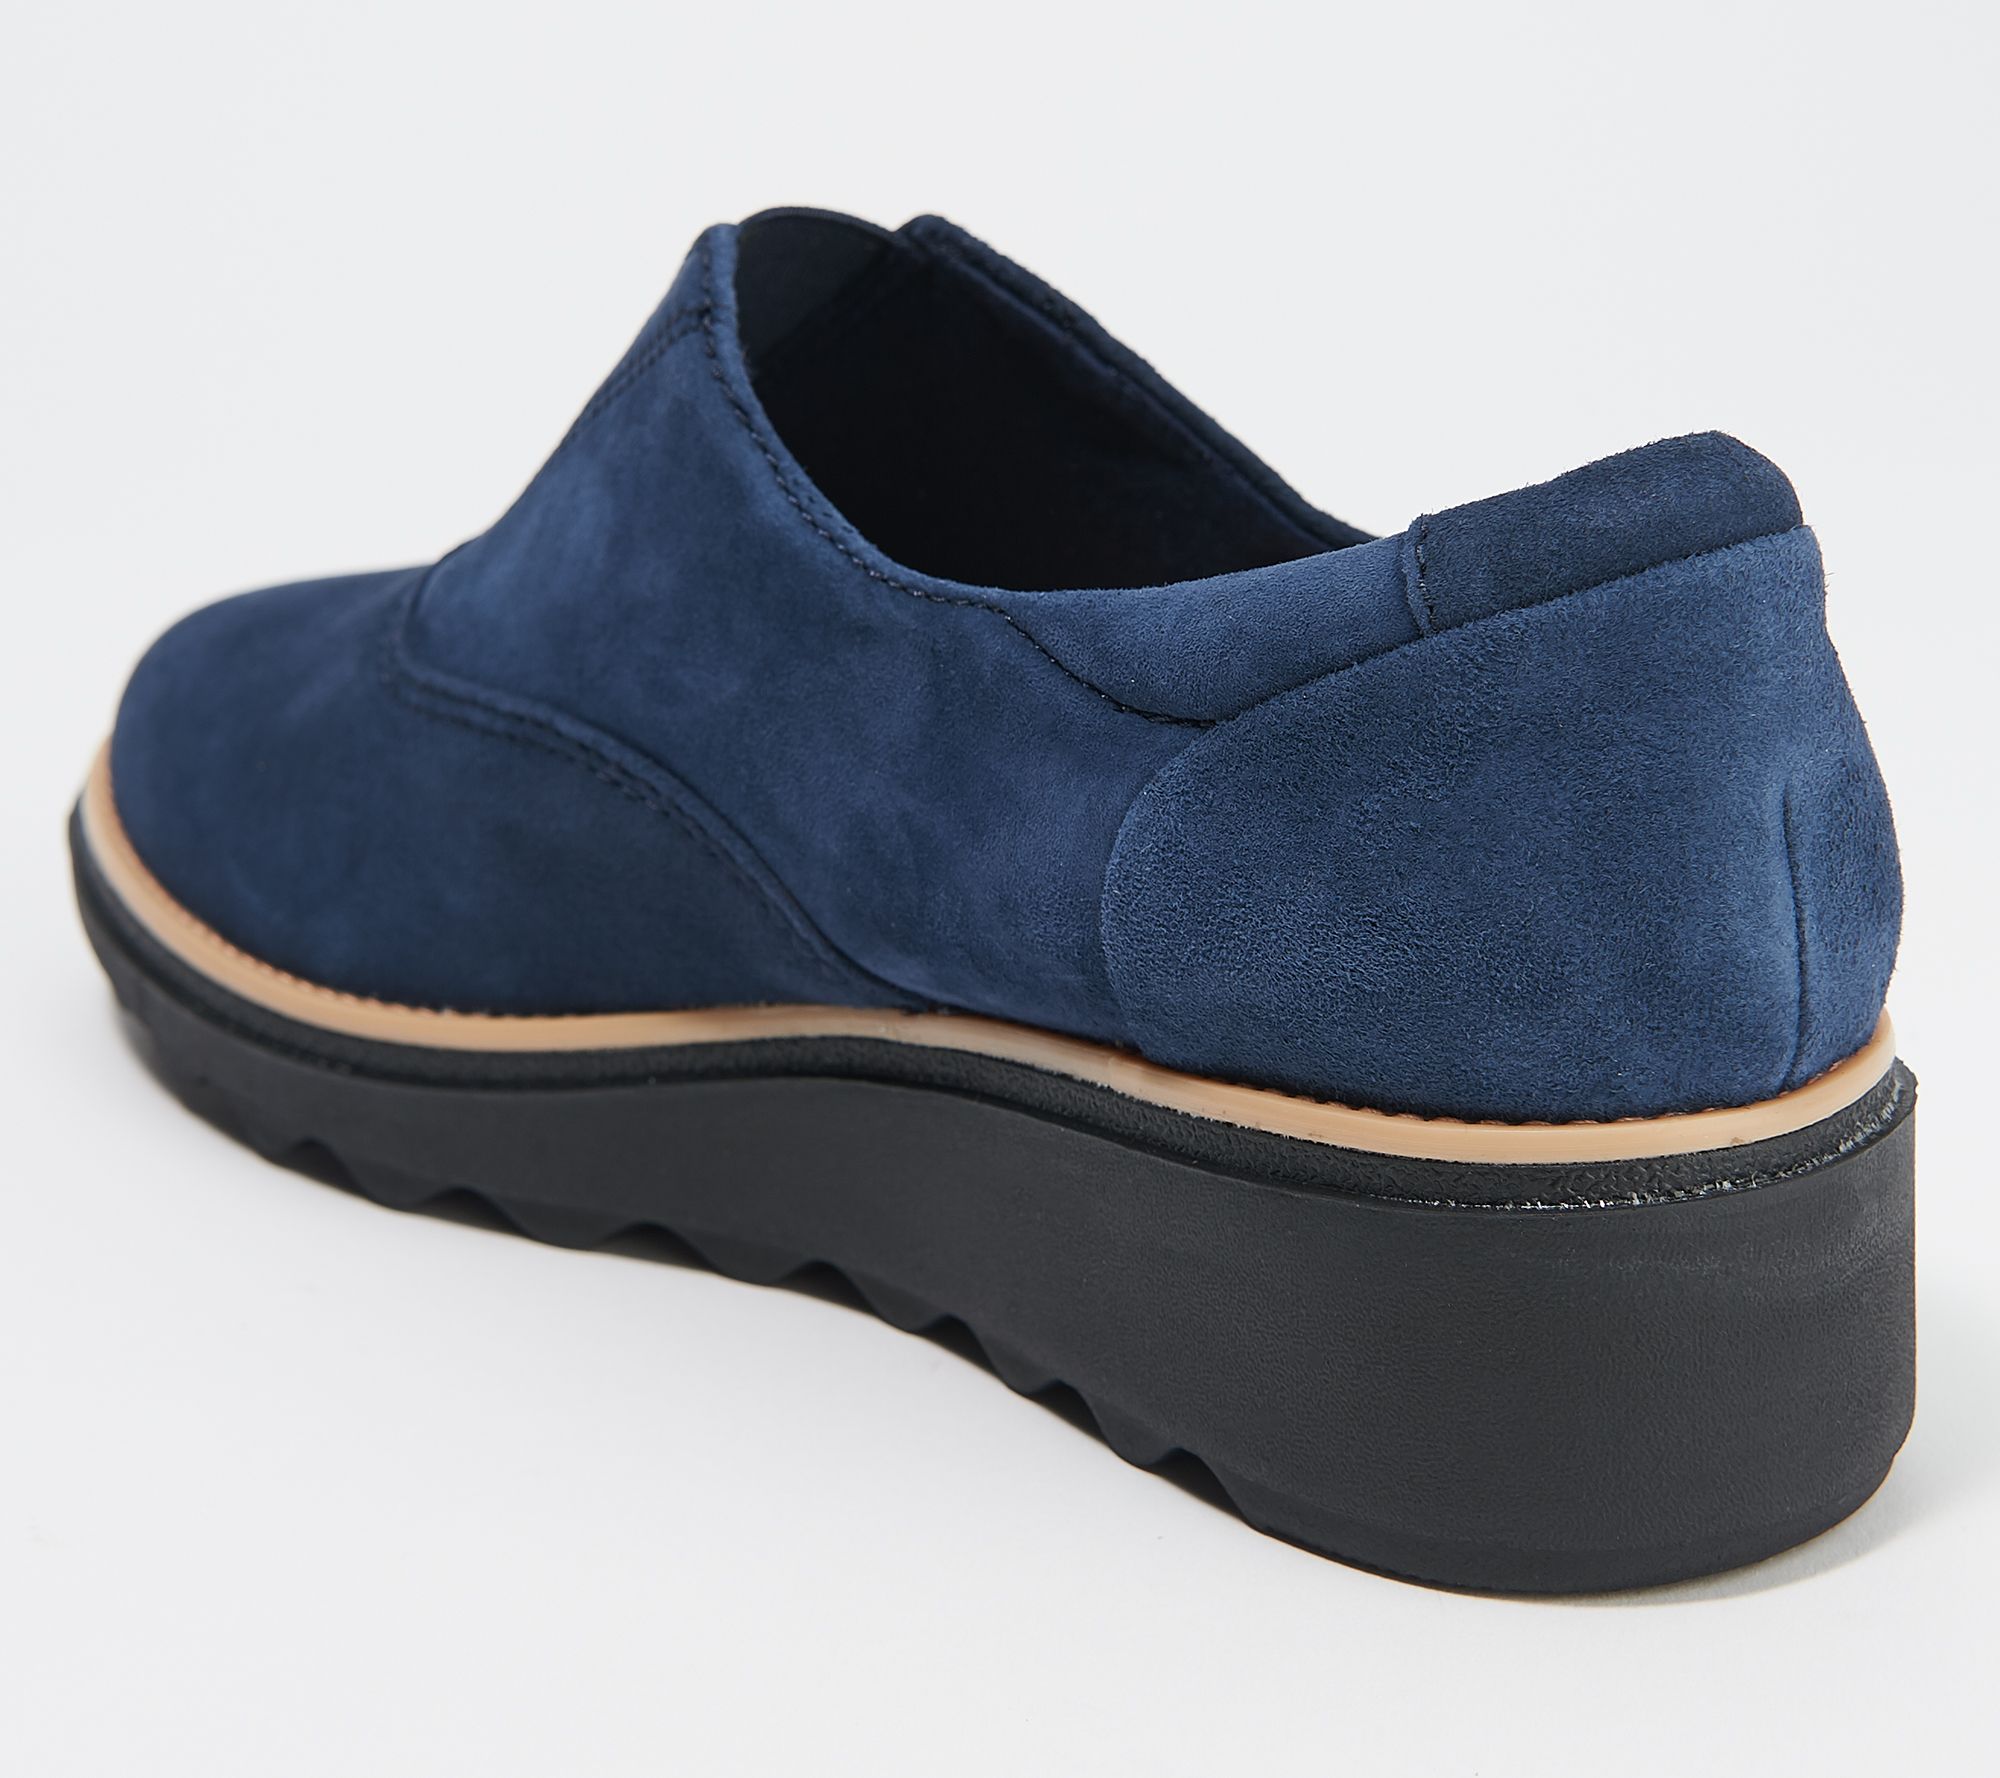 Clarks Collection Suede Slip-On Shoes - Sharon Sail - QVC.com